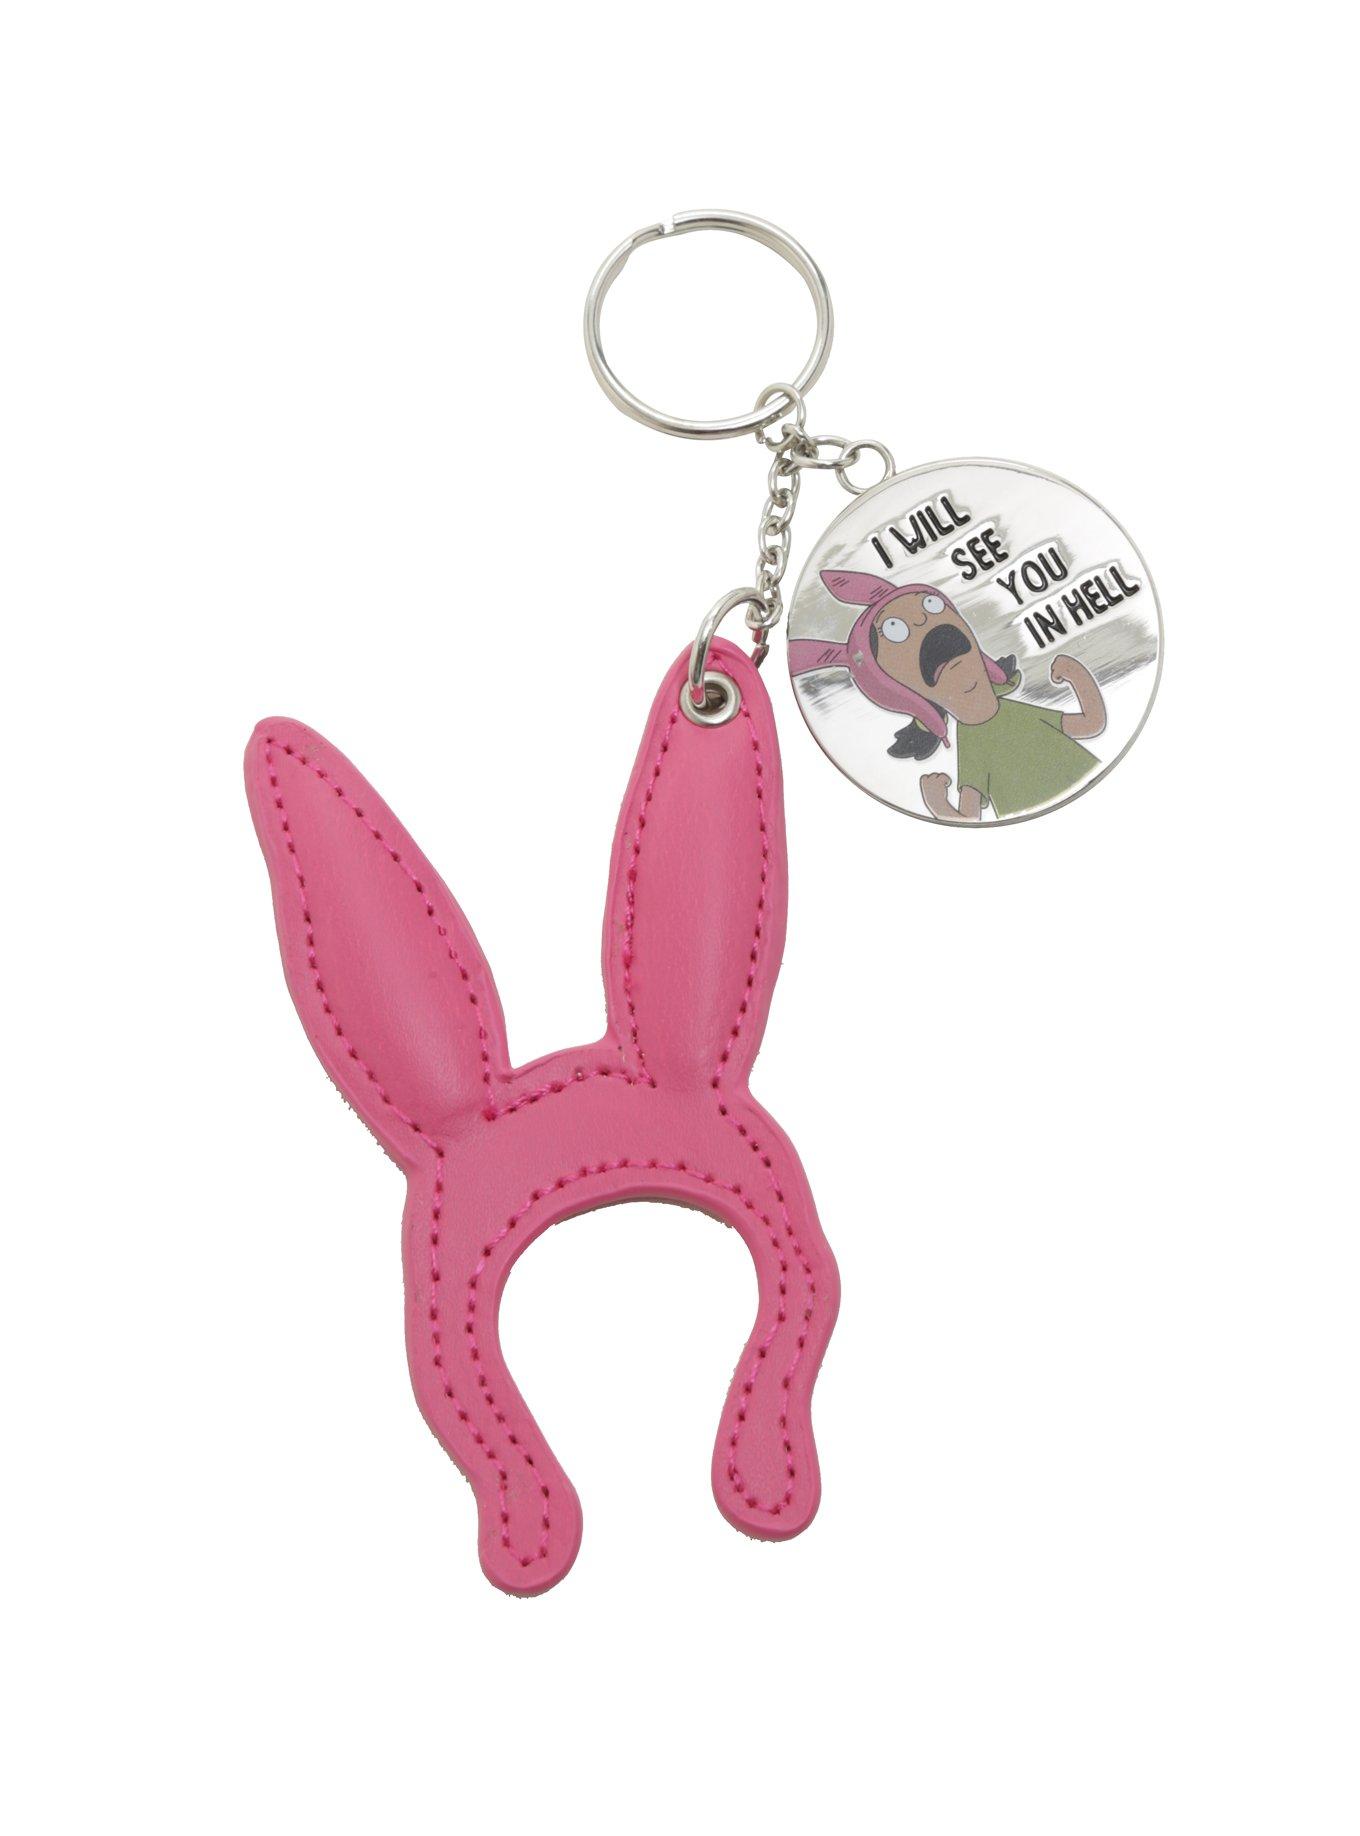 Copy of Wooden Bob's Burgers Louise Belcher Keychain – Bites & Brushes Aug